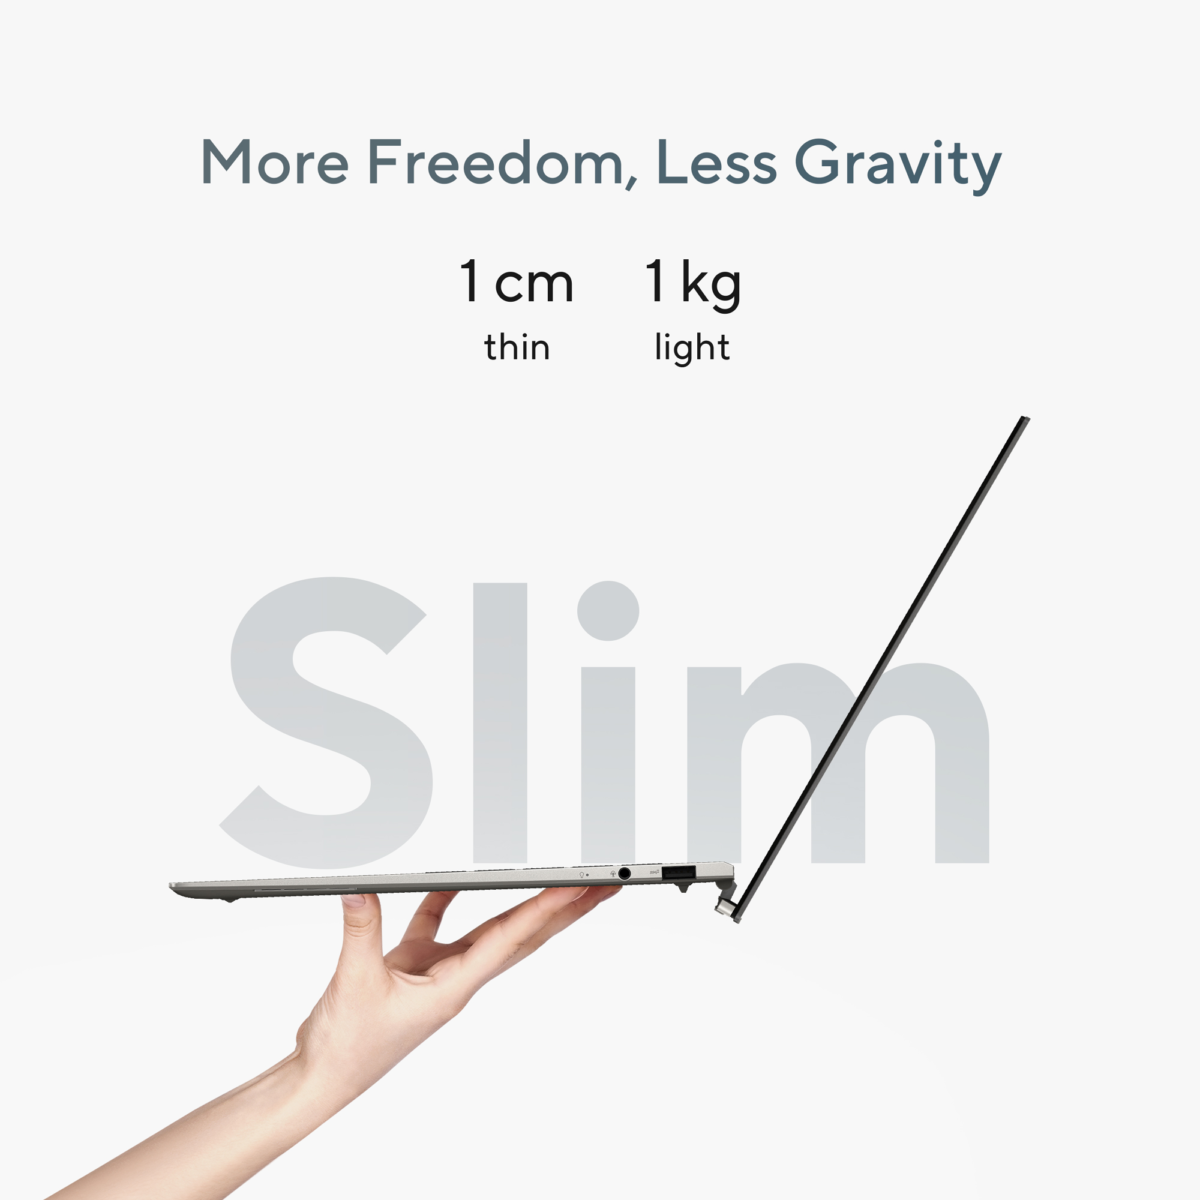 Incredibly thin and light: The latest Zenbook S 13 OLED boasts several impressive features that make it stand out in the market. At 1 cm thin1 and 1 kg light, the new Zenbook S 13 OLED is up to 30% slimmer than the previous generation (UM5302). With the durability of metal and the lightness of plastic, magnesium-aluminium alloy is used for the keyboard deck, forming a tough structure that doesn’t need any extra support. An extremely thin glass covering is used for the touchpad, for an ultrasmooth navigation experience. The laptop also boasts MIL-STD 810H military-grade durability and EPEAT Gold rating — post-industrial recycled (PIR) magnesium-aluminium alloy in the keyboard cover, chassis and lid, the keycaps and speakers incorporate post-consumer-recycled (PCR) plastics, and the speakers also use ocean-bound plastics.